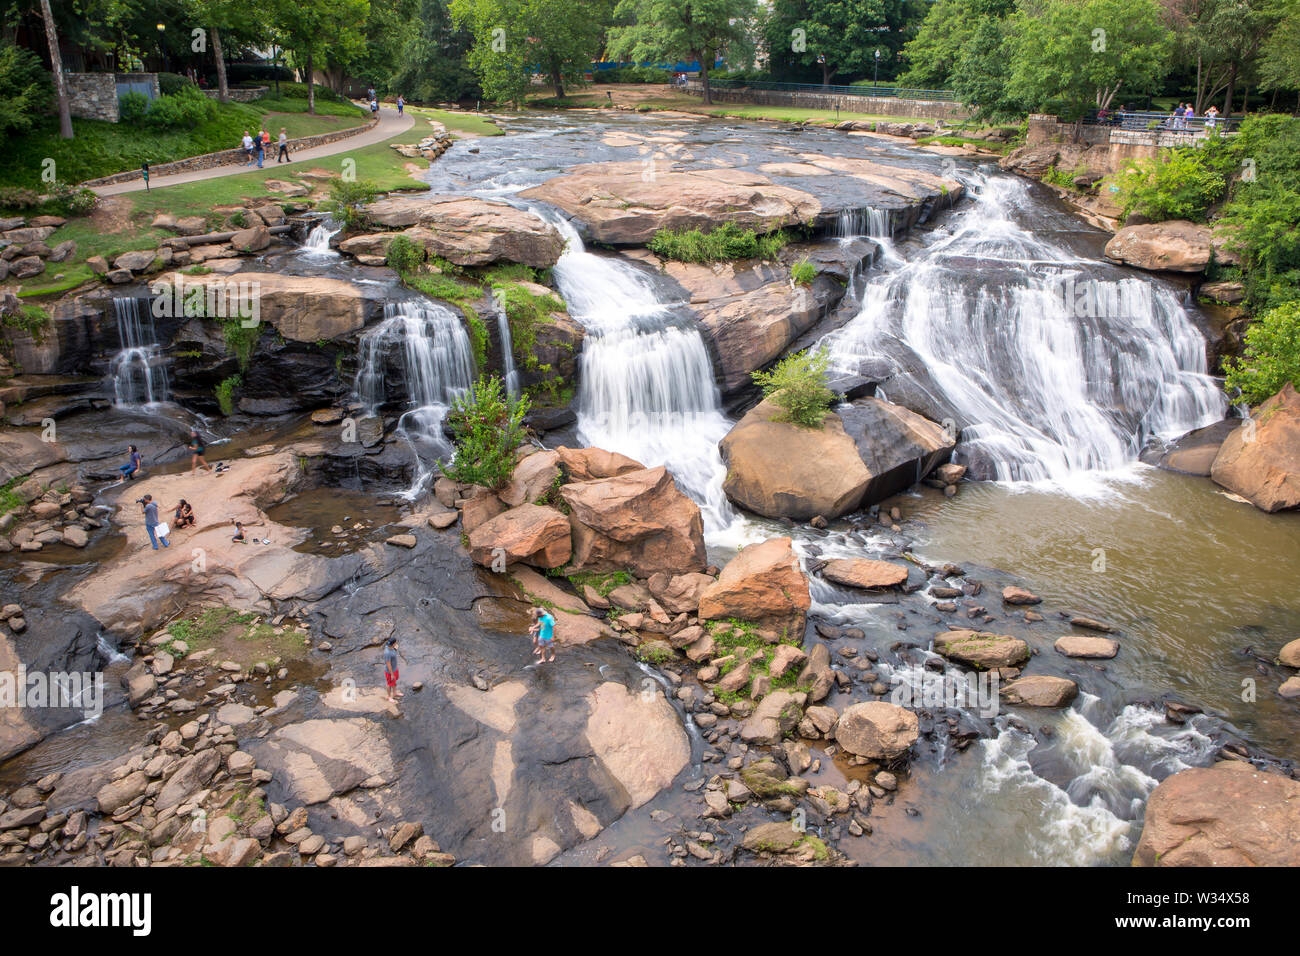 A view of the Reedy River Falls in Falls Park in downtown Greenville, South Carolina, viewed from the Liberty Bridge. Stock Photo